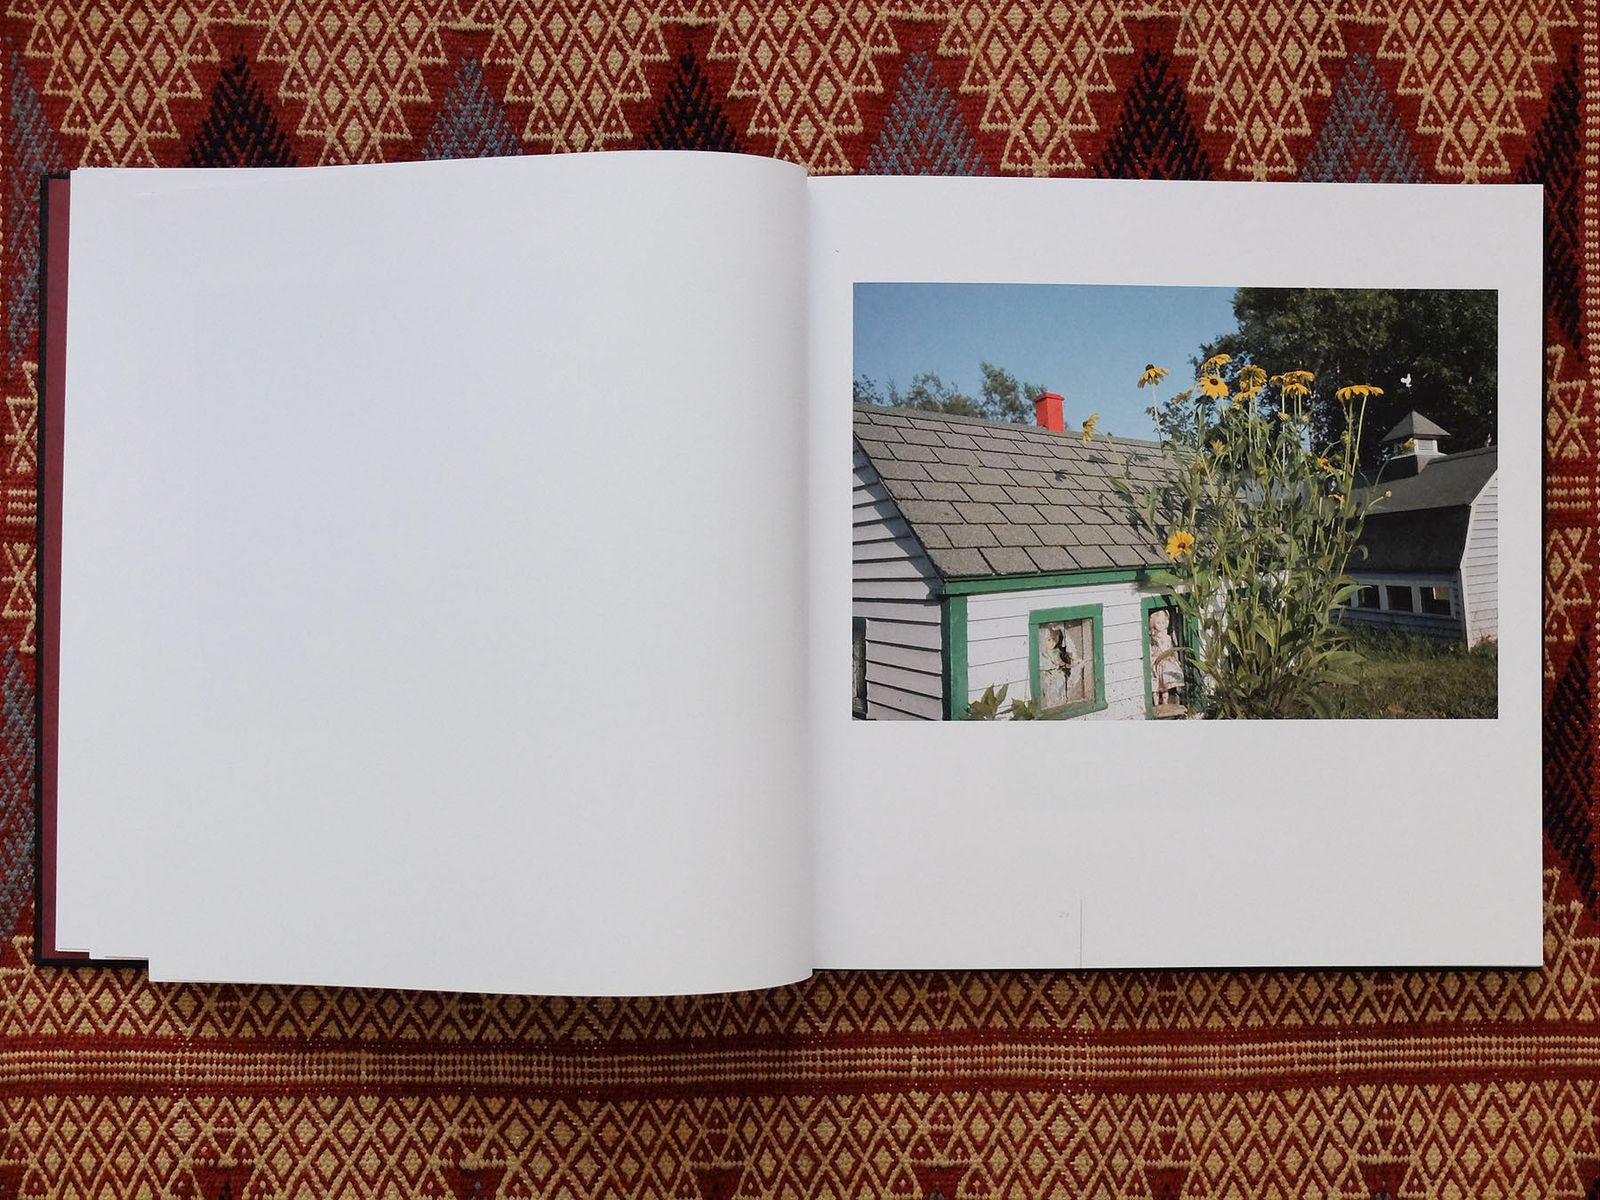 © Leporello Books - Image from the TRANSPARENCIES: SMALL CAMERA WORKS 1971-1979 by Stephen Shore photography project